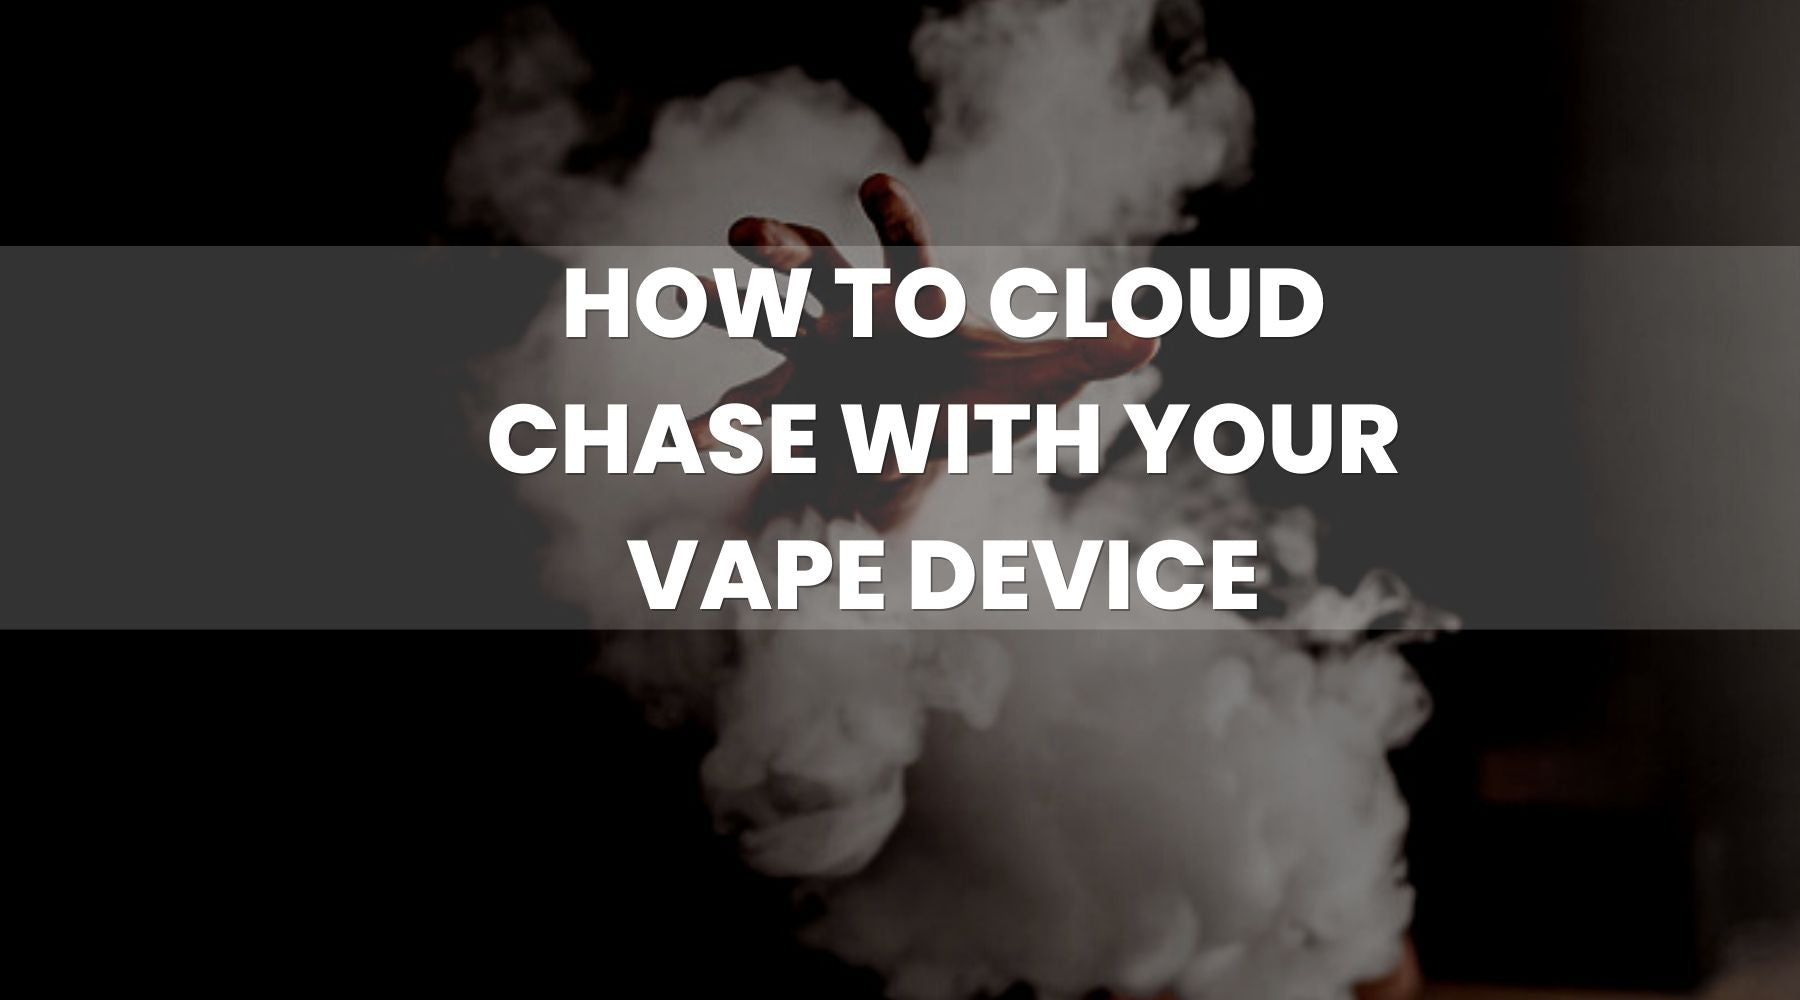 How to Cloud Chase with your Vape